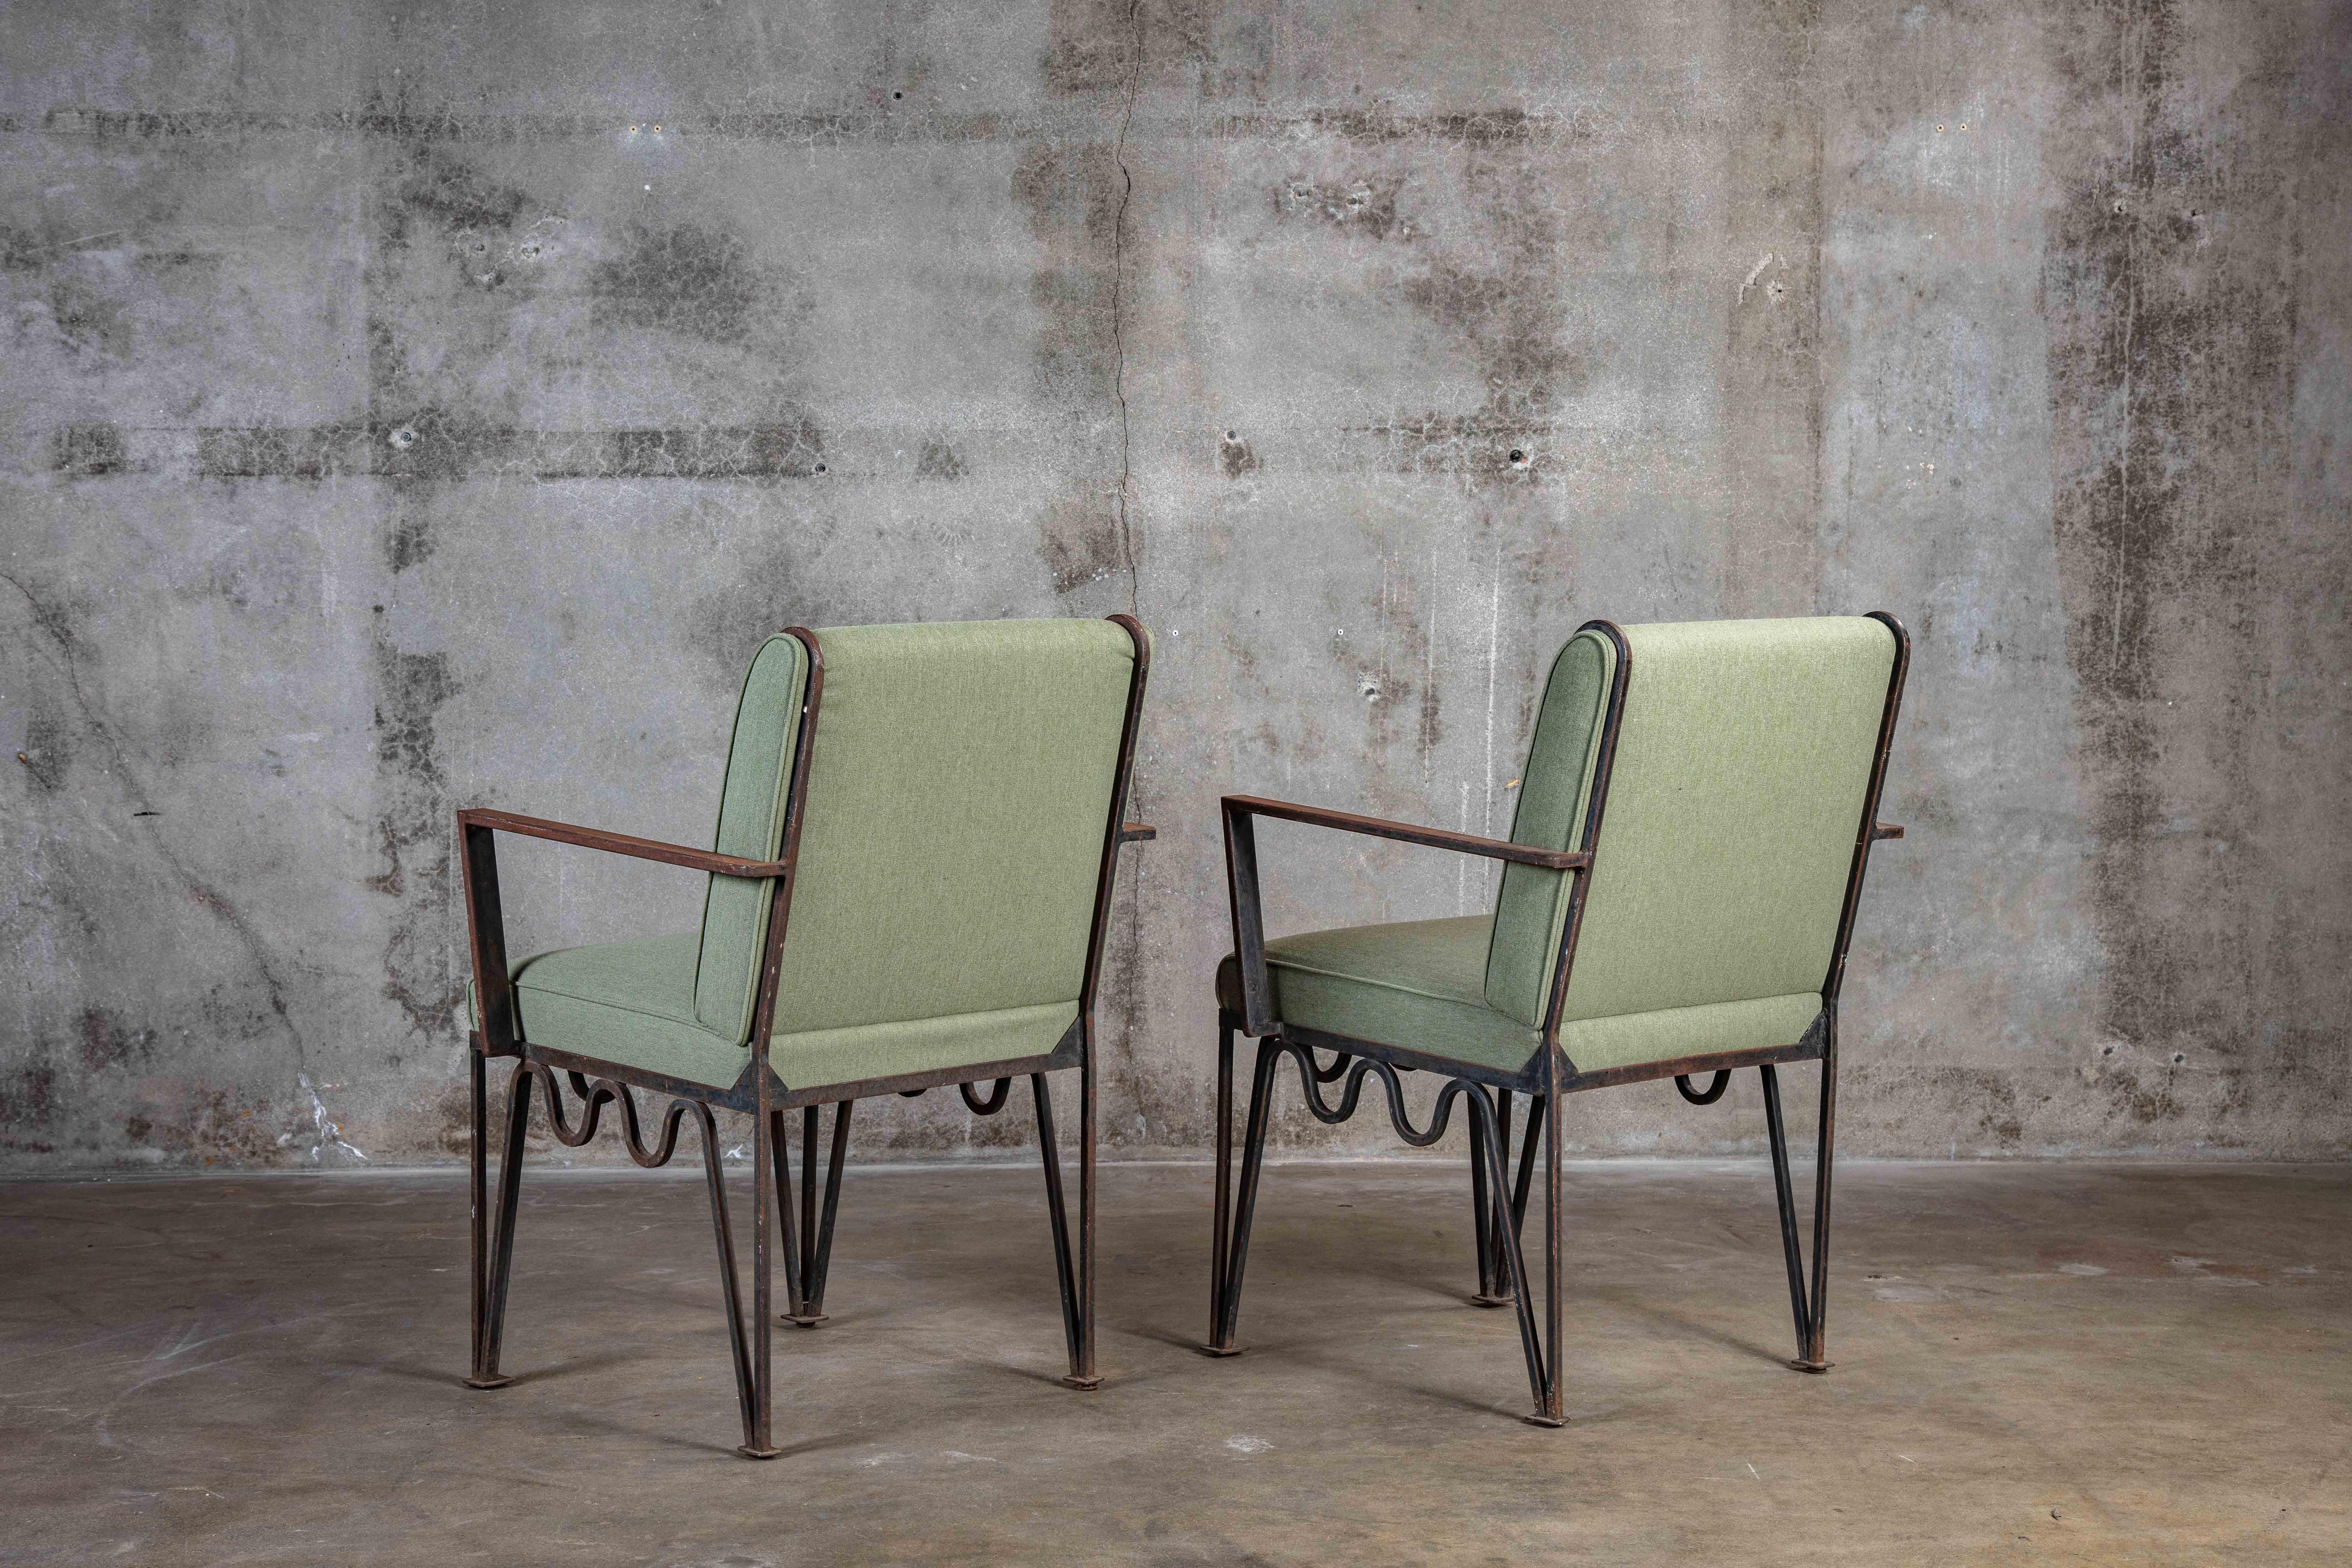 Pair of Pacific Iron armchairs in bronze, 1940s

Measures: Arm: 26